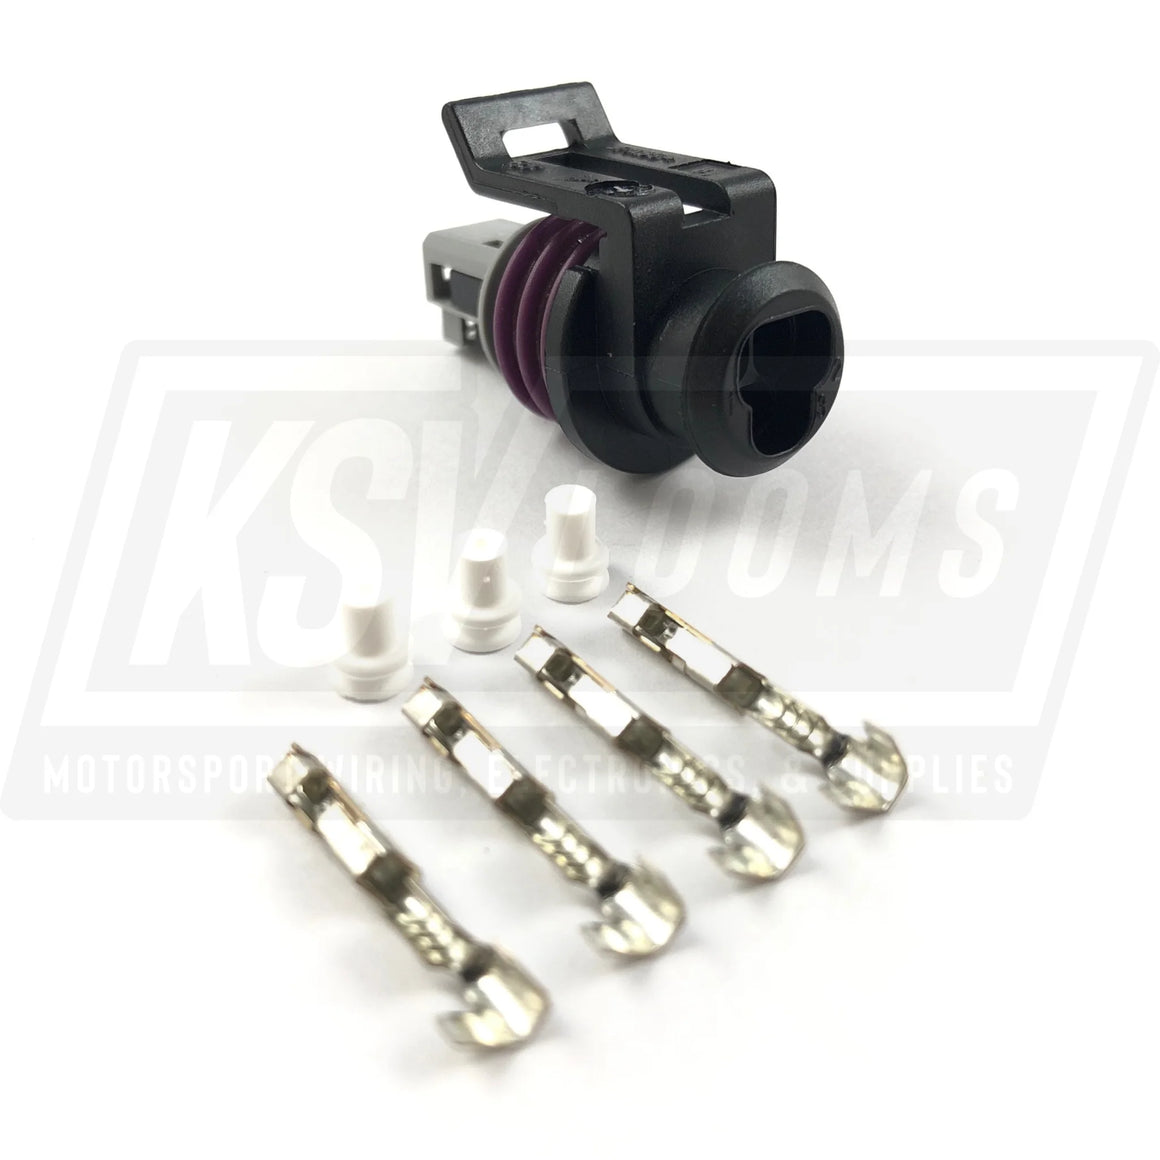 3-Way Connector Kit Same As Fueltech 5005100023 (22-20 Awg)